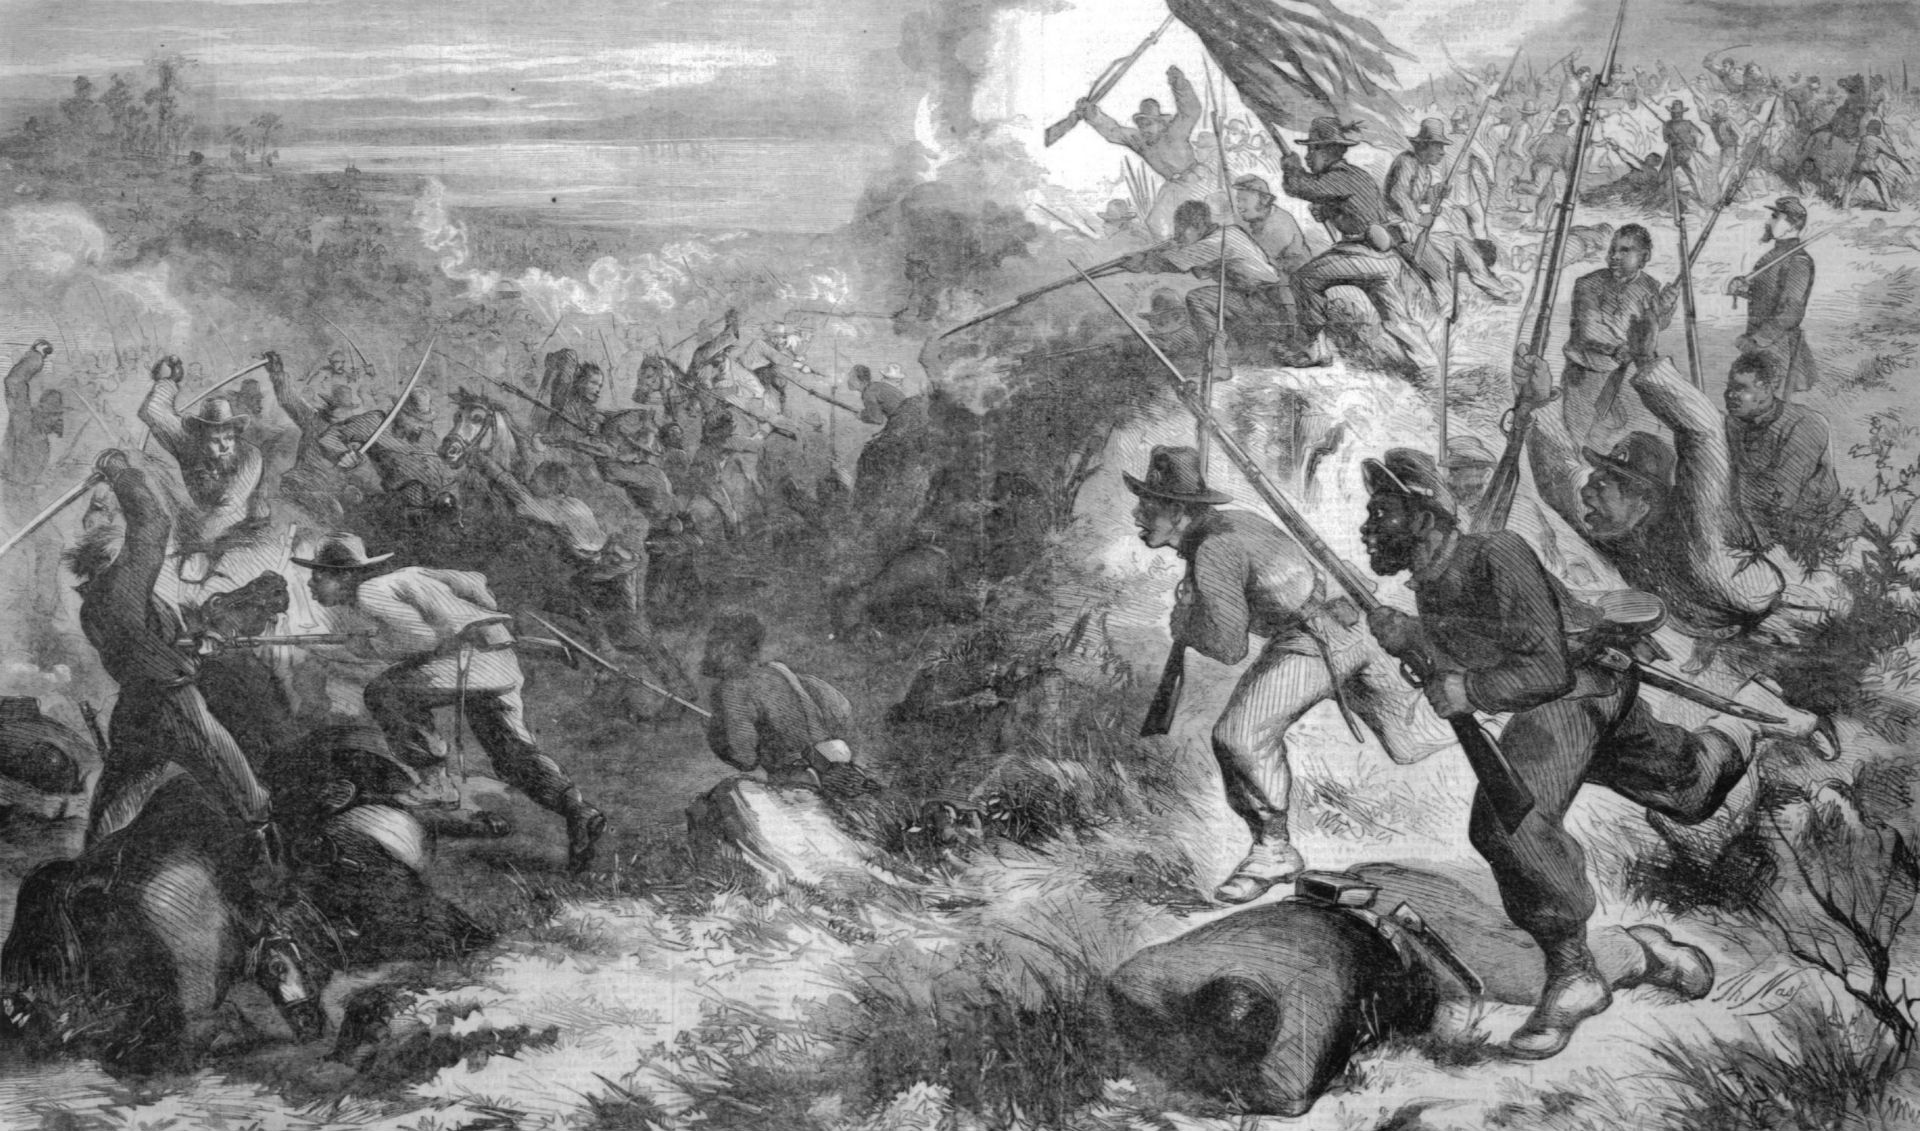 african-american-soldiers-fighting-at-island-mound.jpg